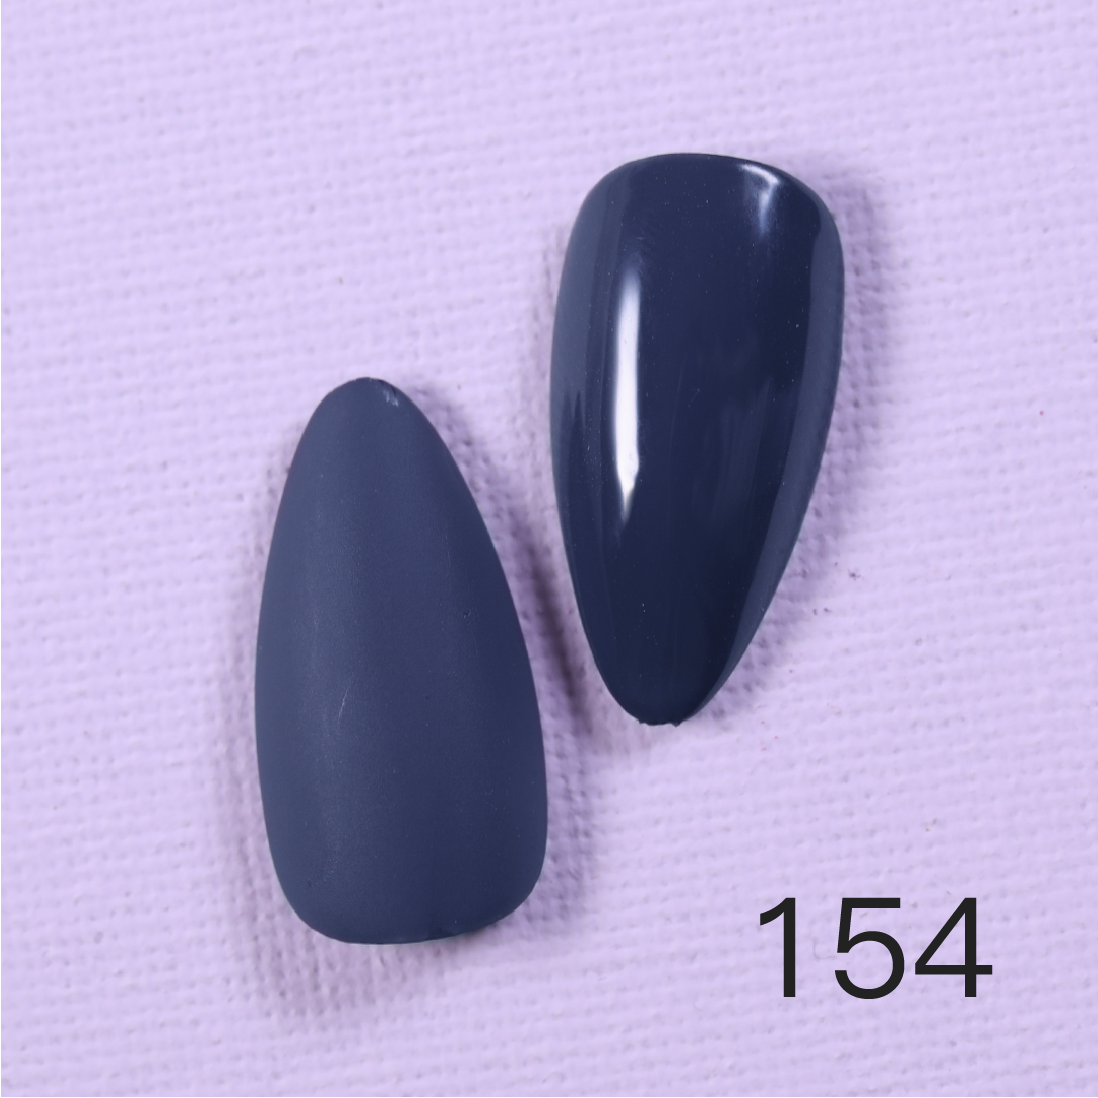 {{ GelPolish_USA }} {{ magnetic_gelpolish}} 154 {{ Gelpolish_usa}} {{ Gel_polish}} Mela Mela Gel Polish Colour - 80 colors available to choose from - {{ UV_Drying_machine}} - {{ Powerful_LED_Nail_Dryer}} {{ Gelish }} {{Gel_nail_polish}} {{ Orly}}